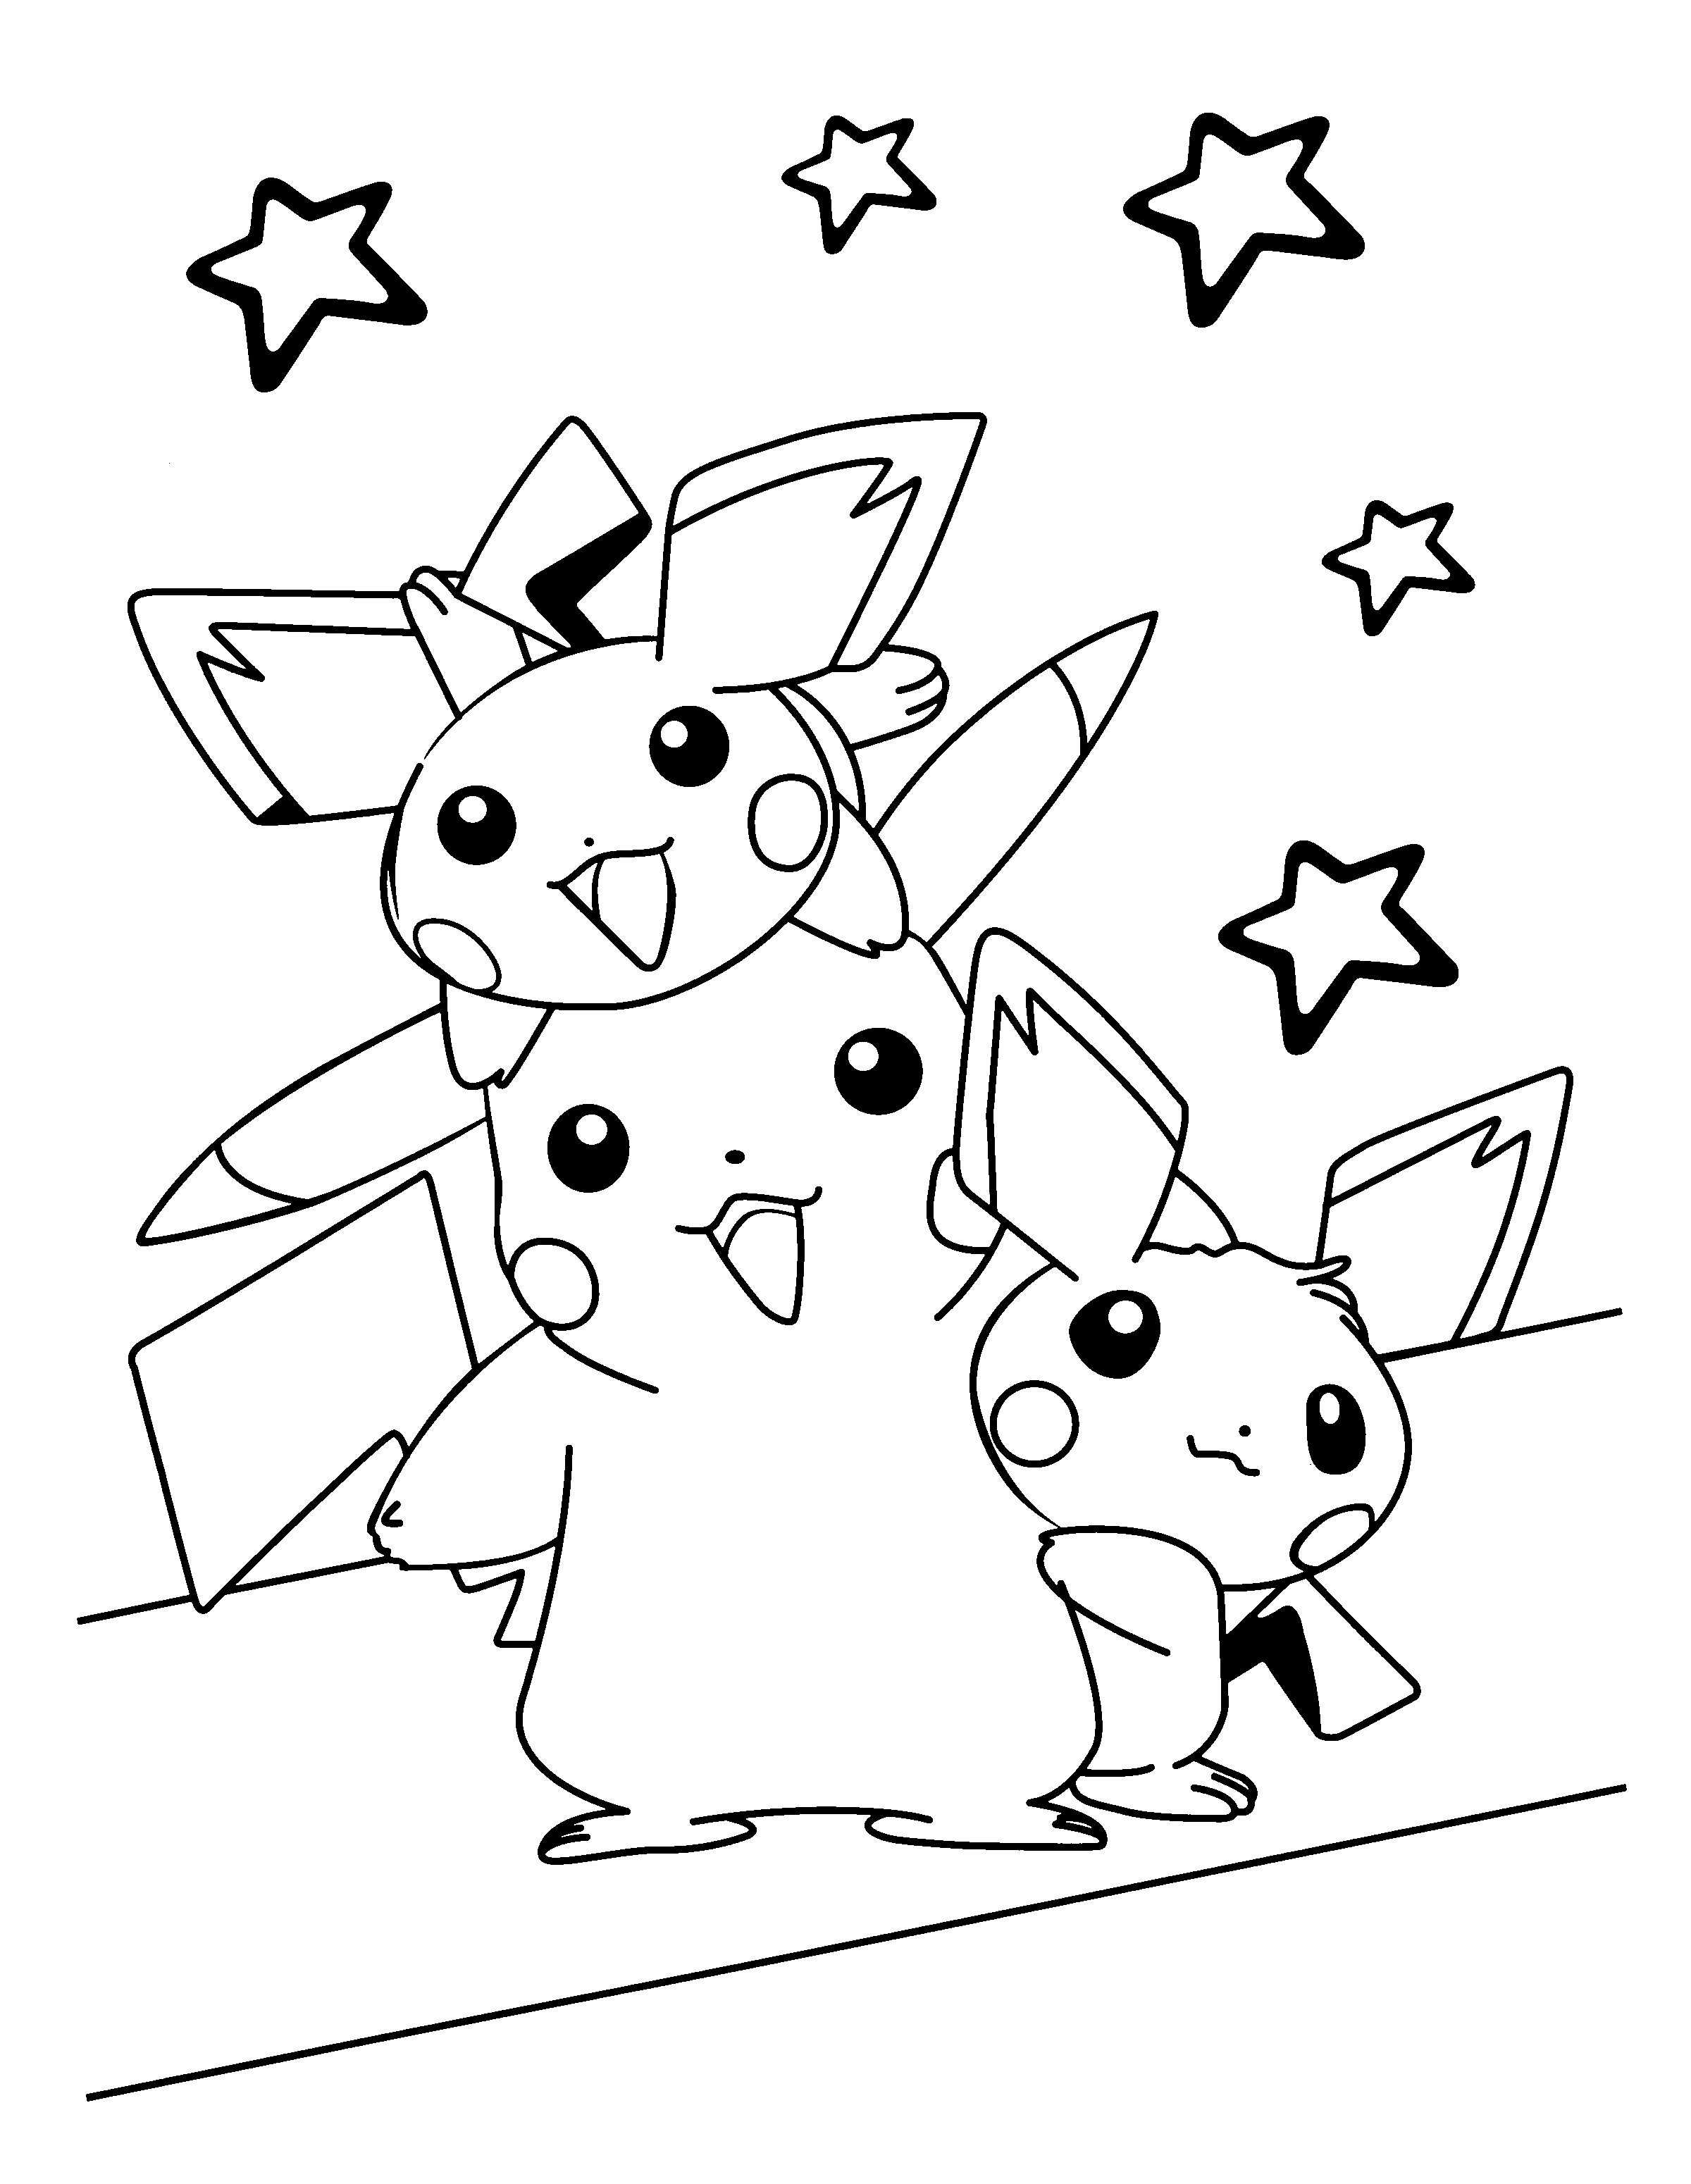 animated-coloring-pages-pokemon-image-0078